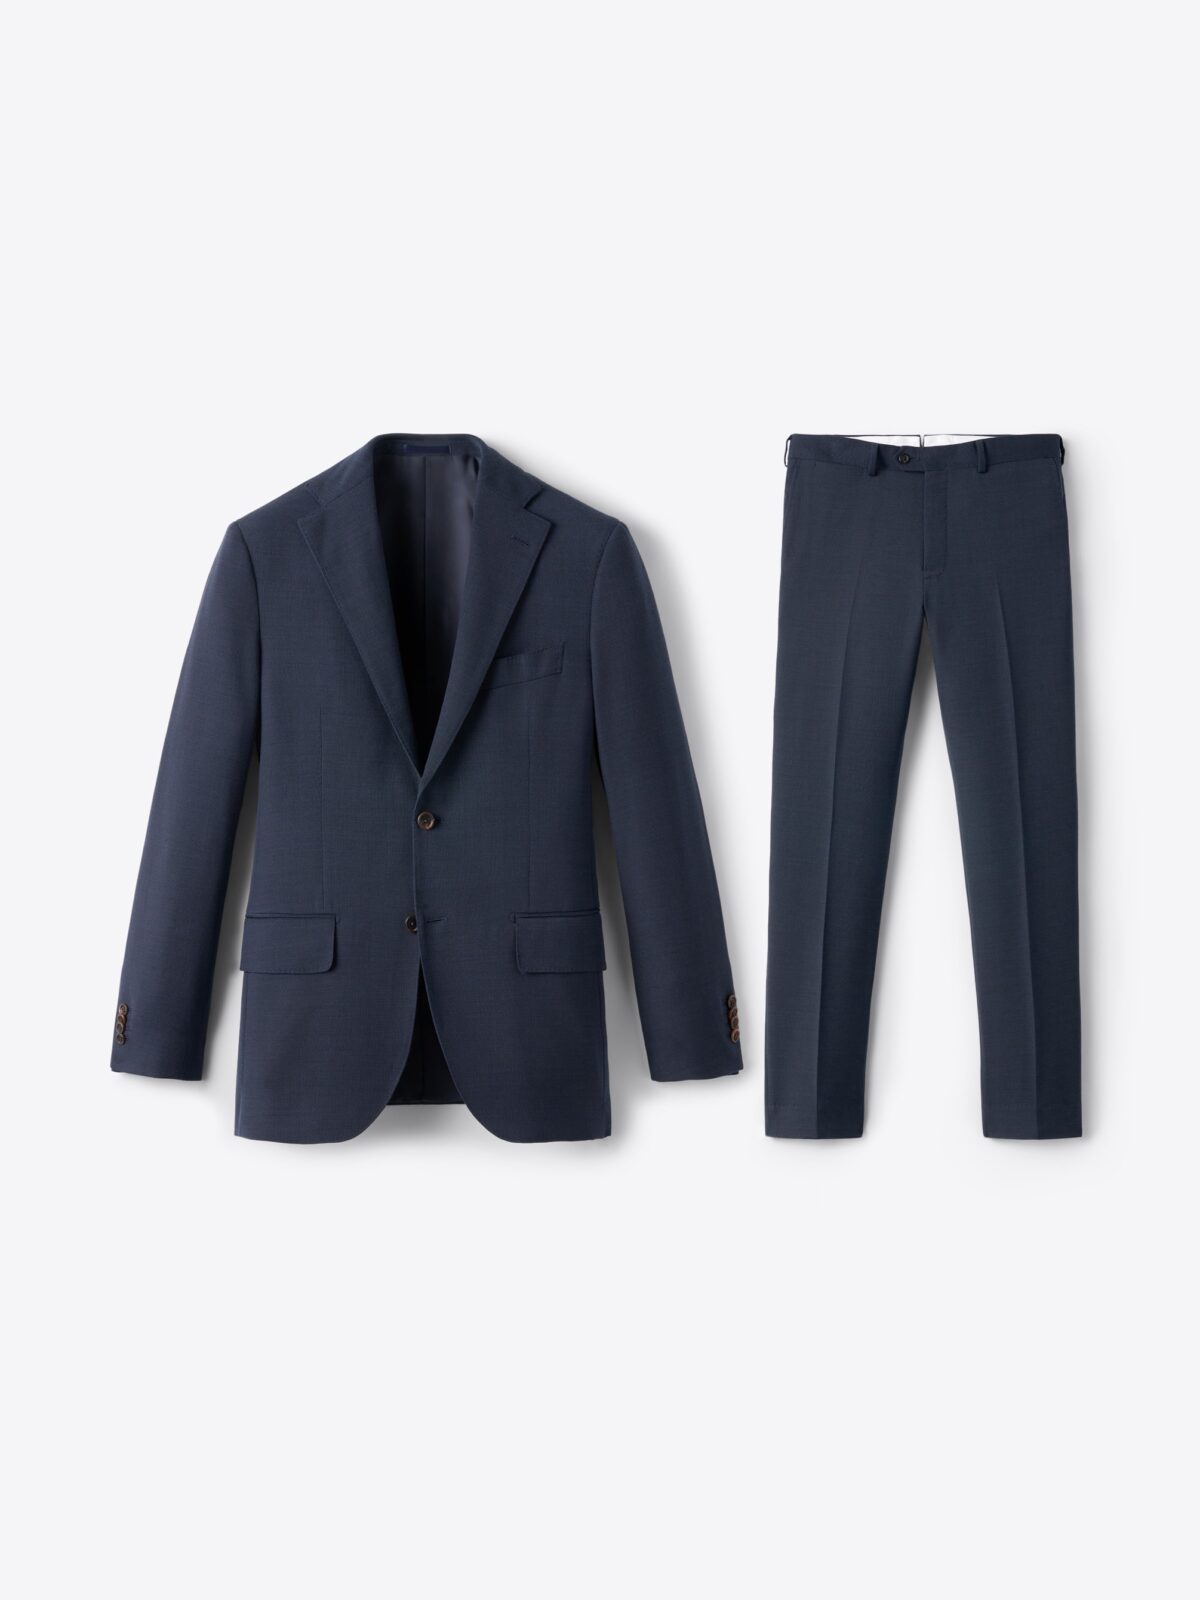 Notched lapel versus peaked lapel suits (and finding the right one for you)  - Bespoke Edge